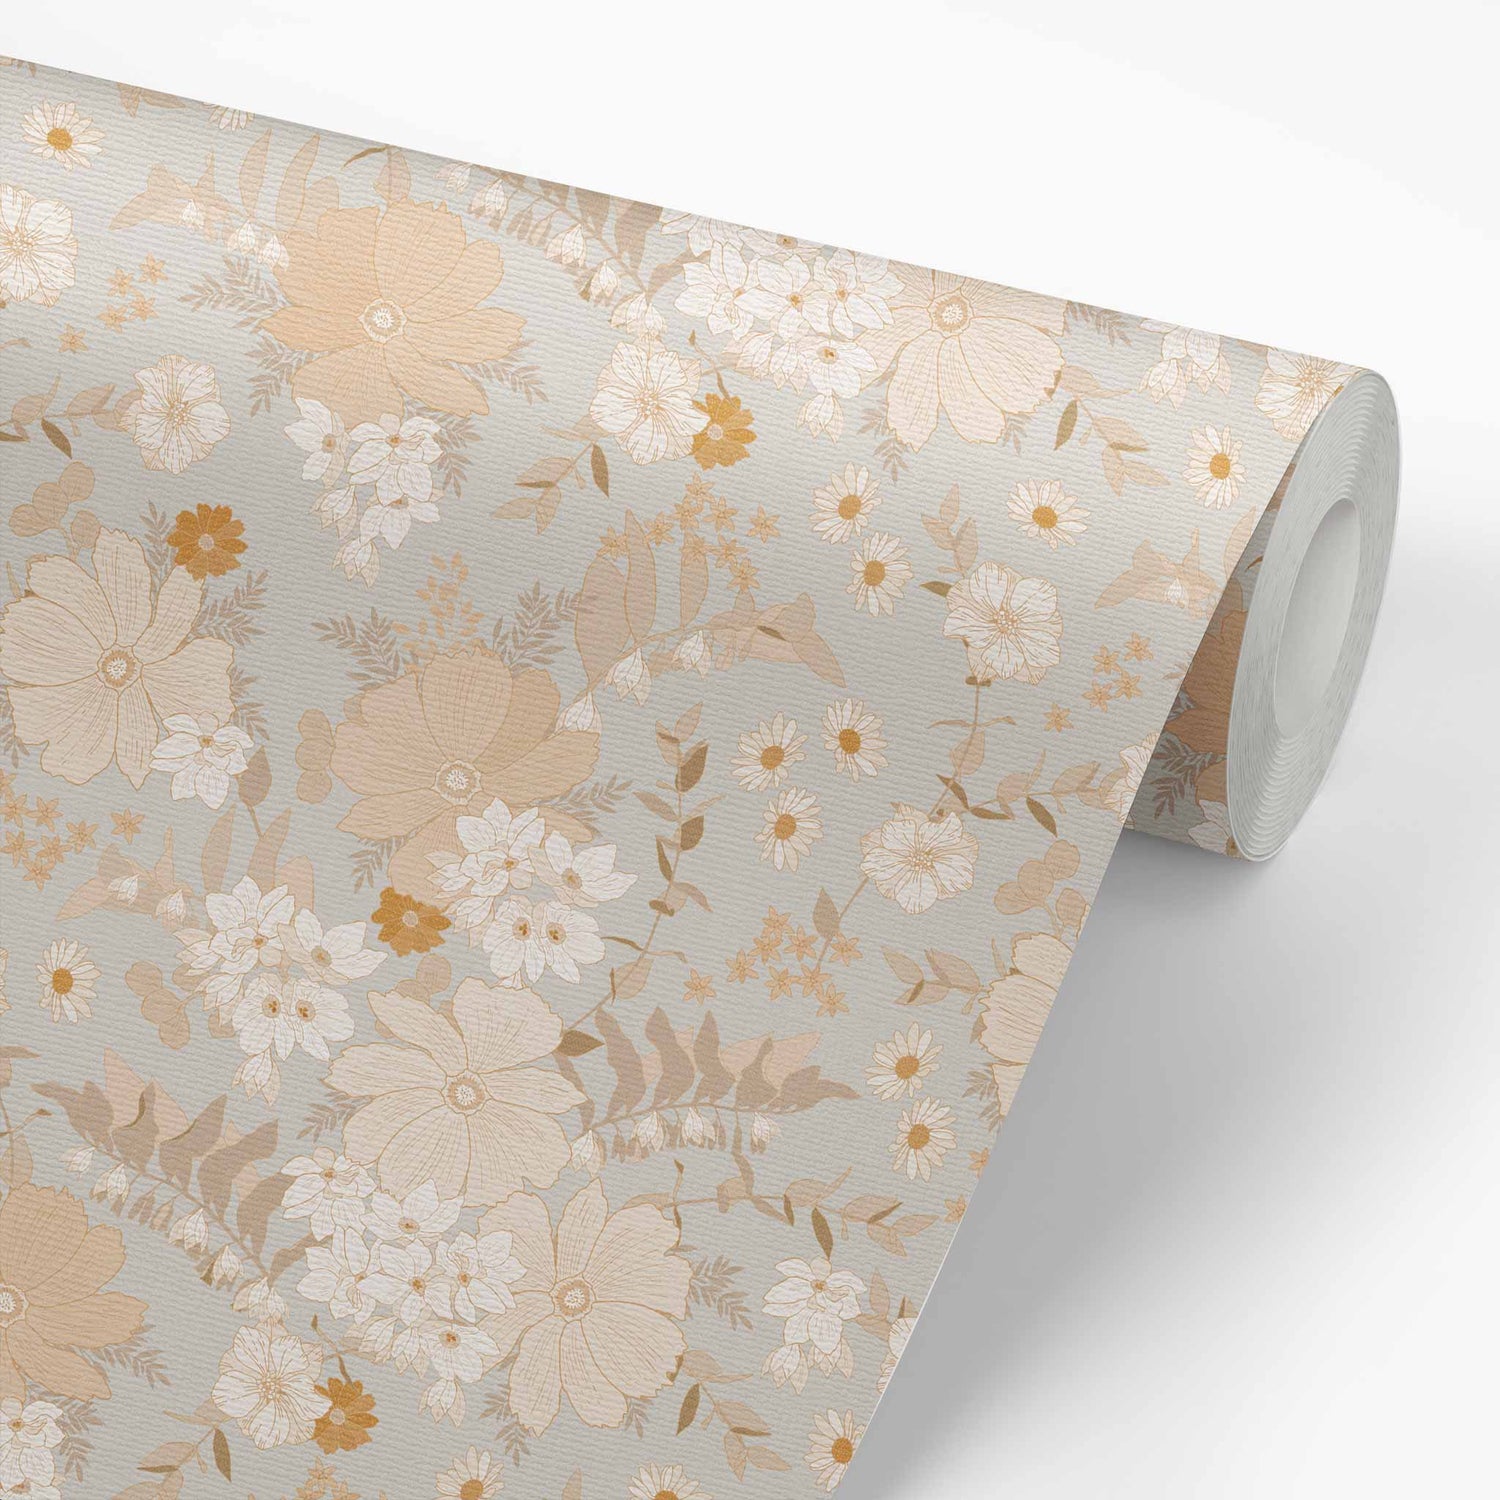 Our Spring Florals Wallpaper in Gray is a statement-making solution, featuring elegant flowers to add a touch of springtime beauty to your home.